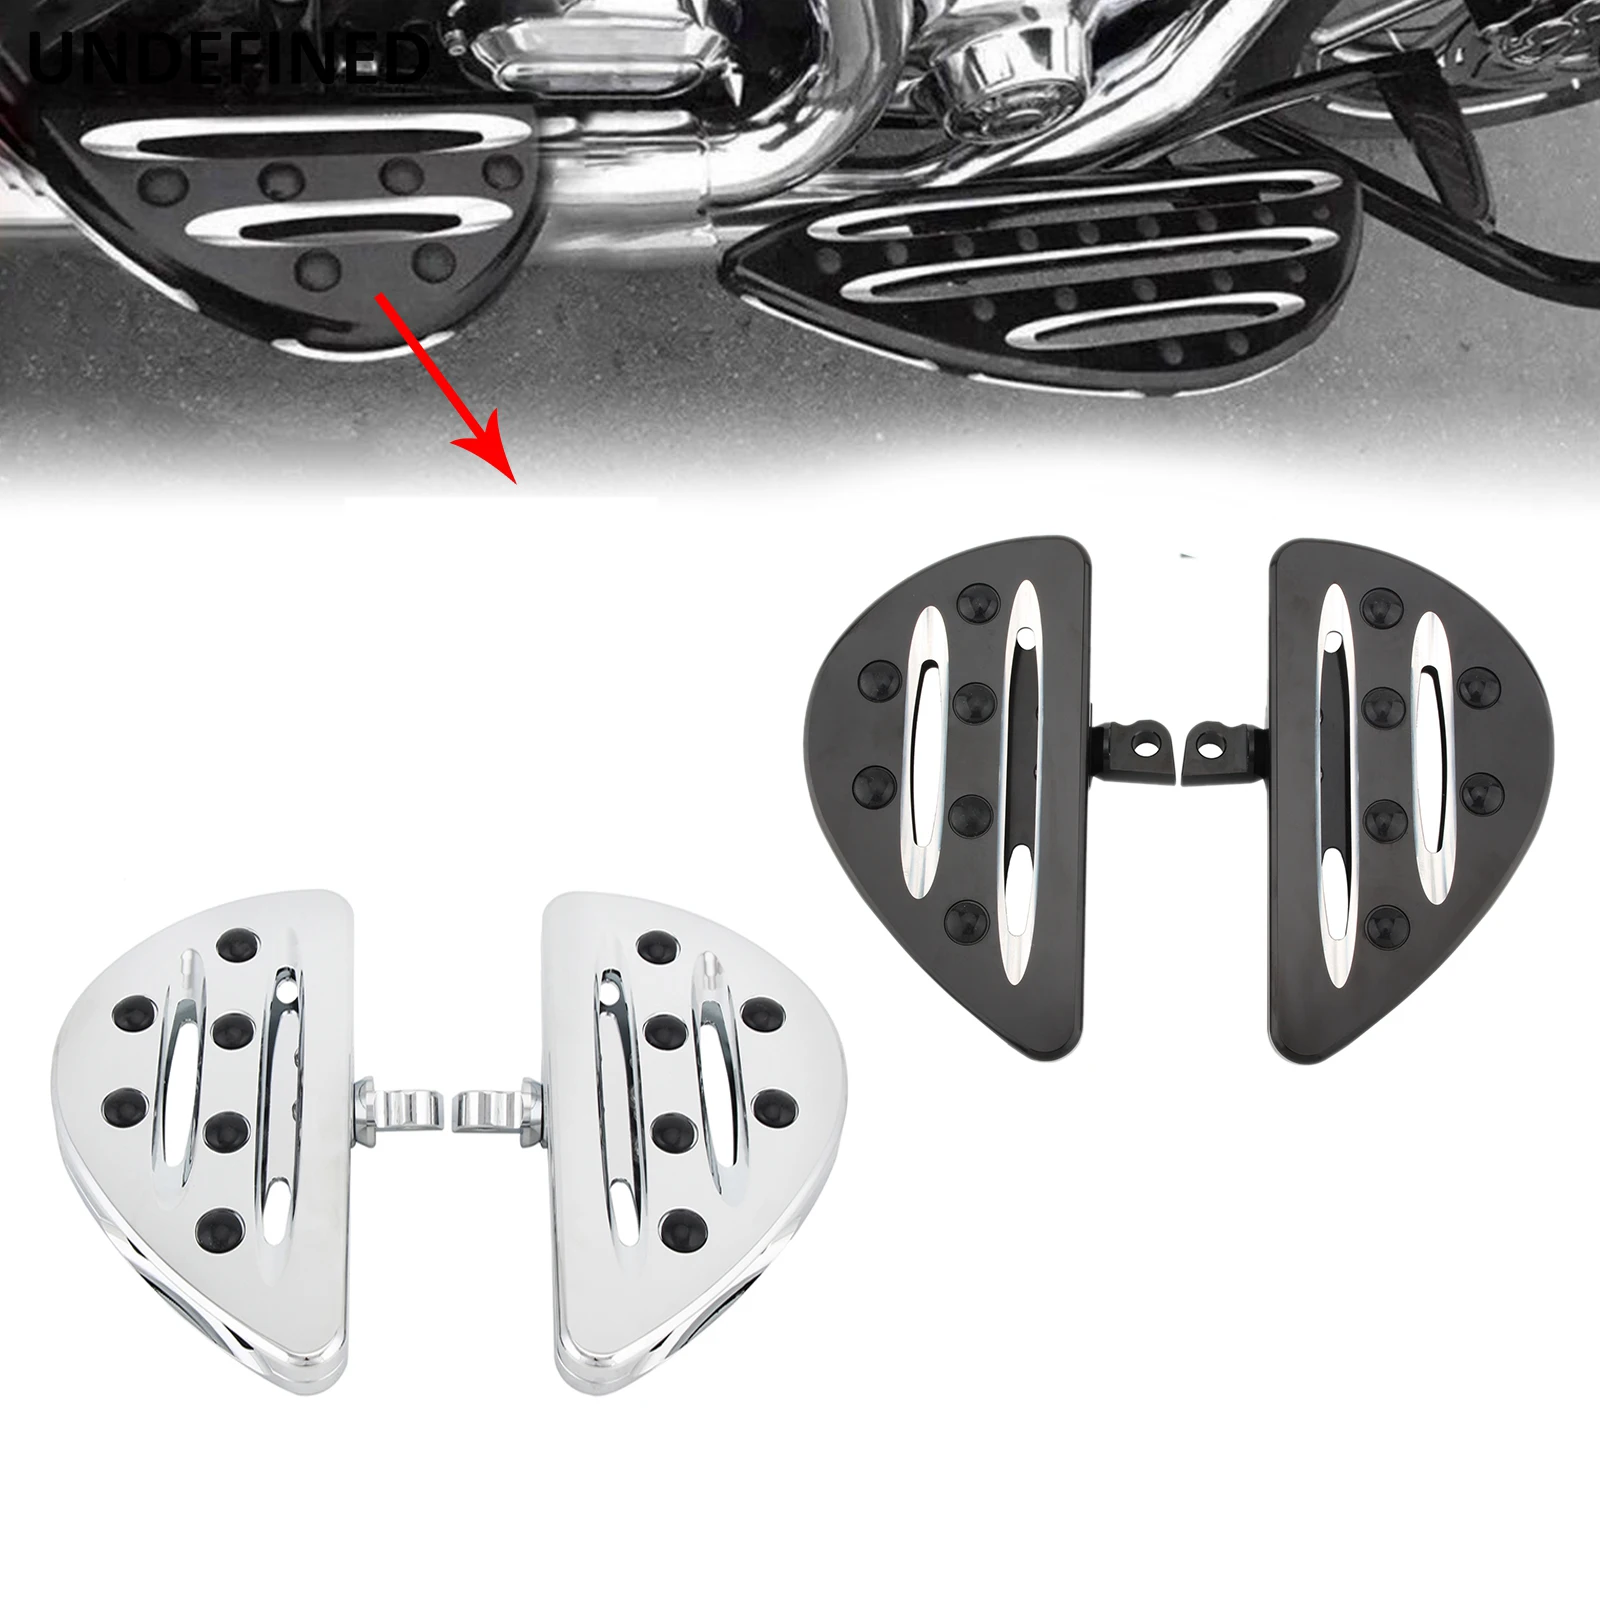 

Rear Passenger Floorboards Footrests Motor Foot Pegs Pedals For Harley Touring Tour Street Electra Glide Road King Softail Dyna